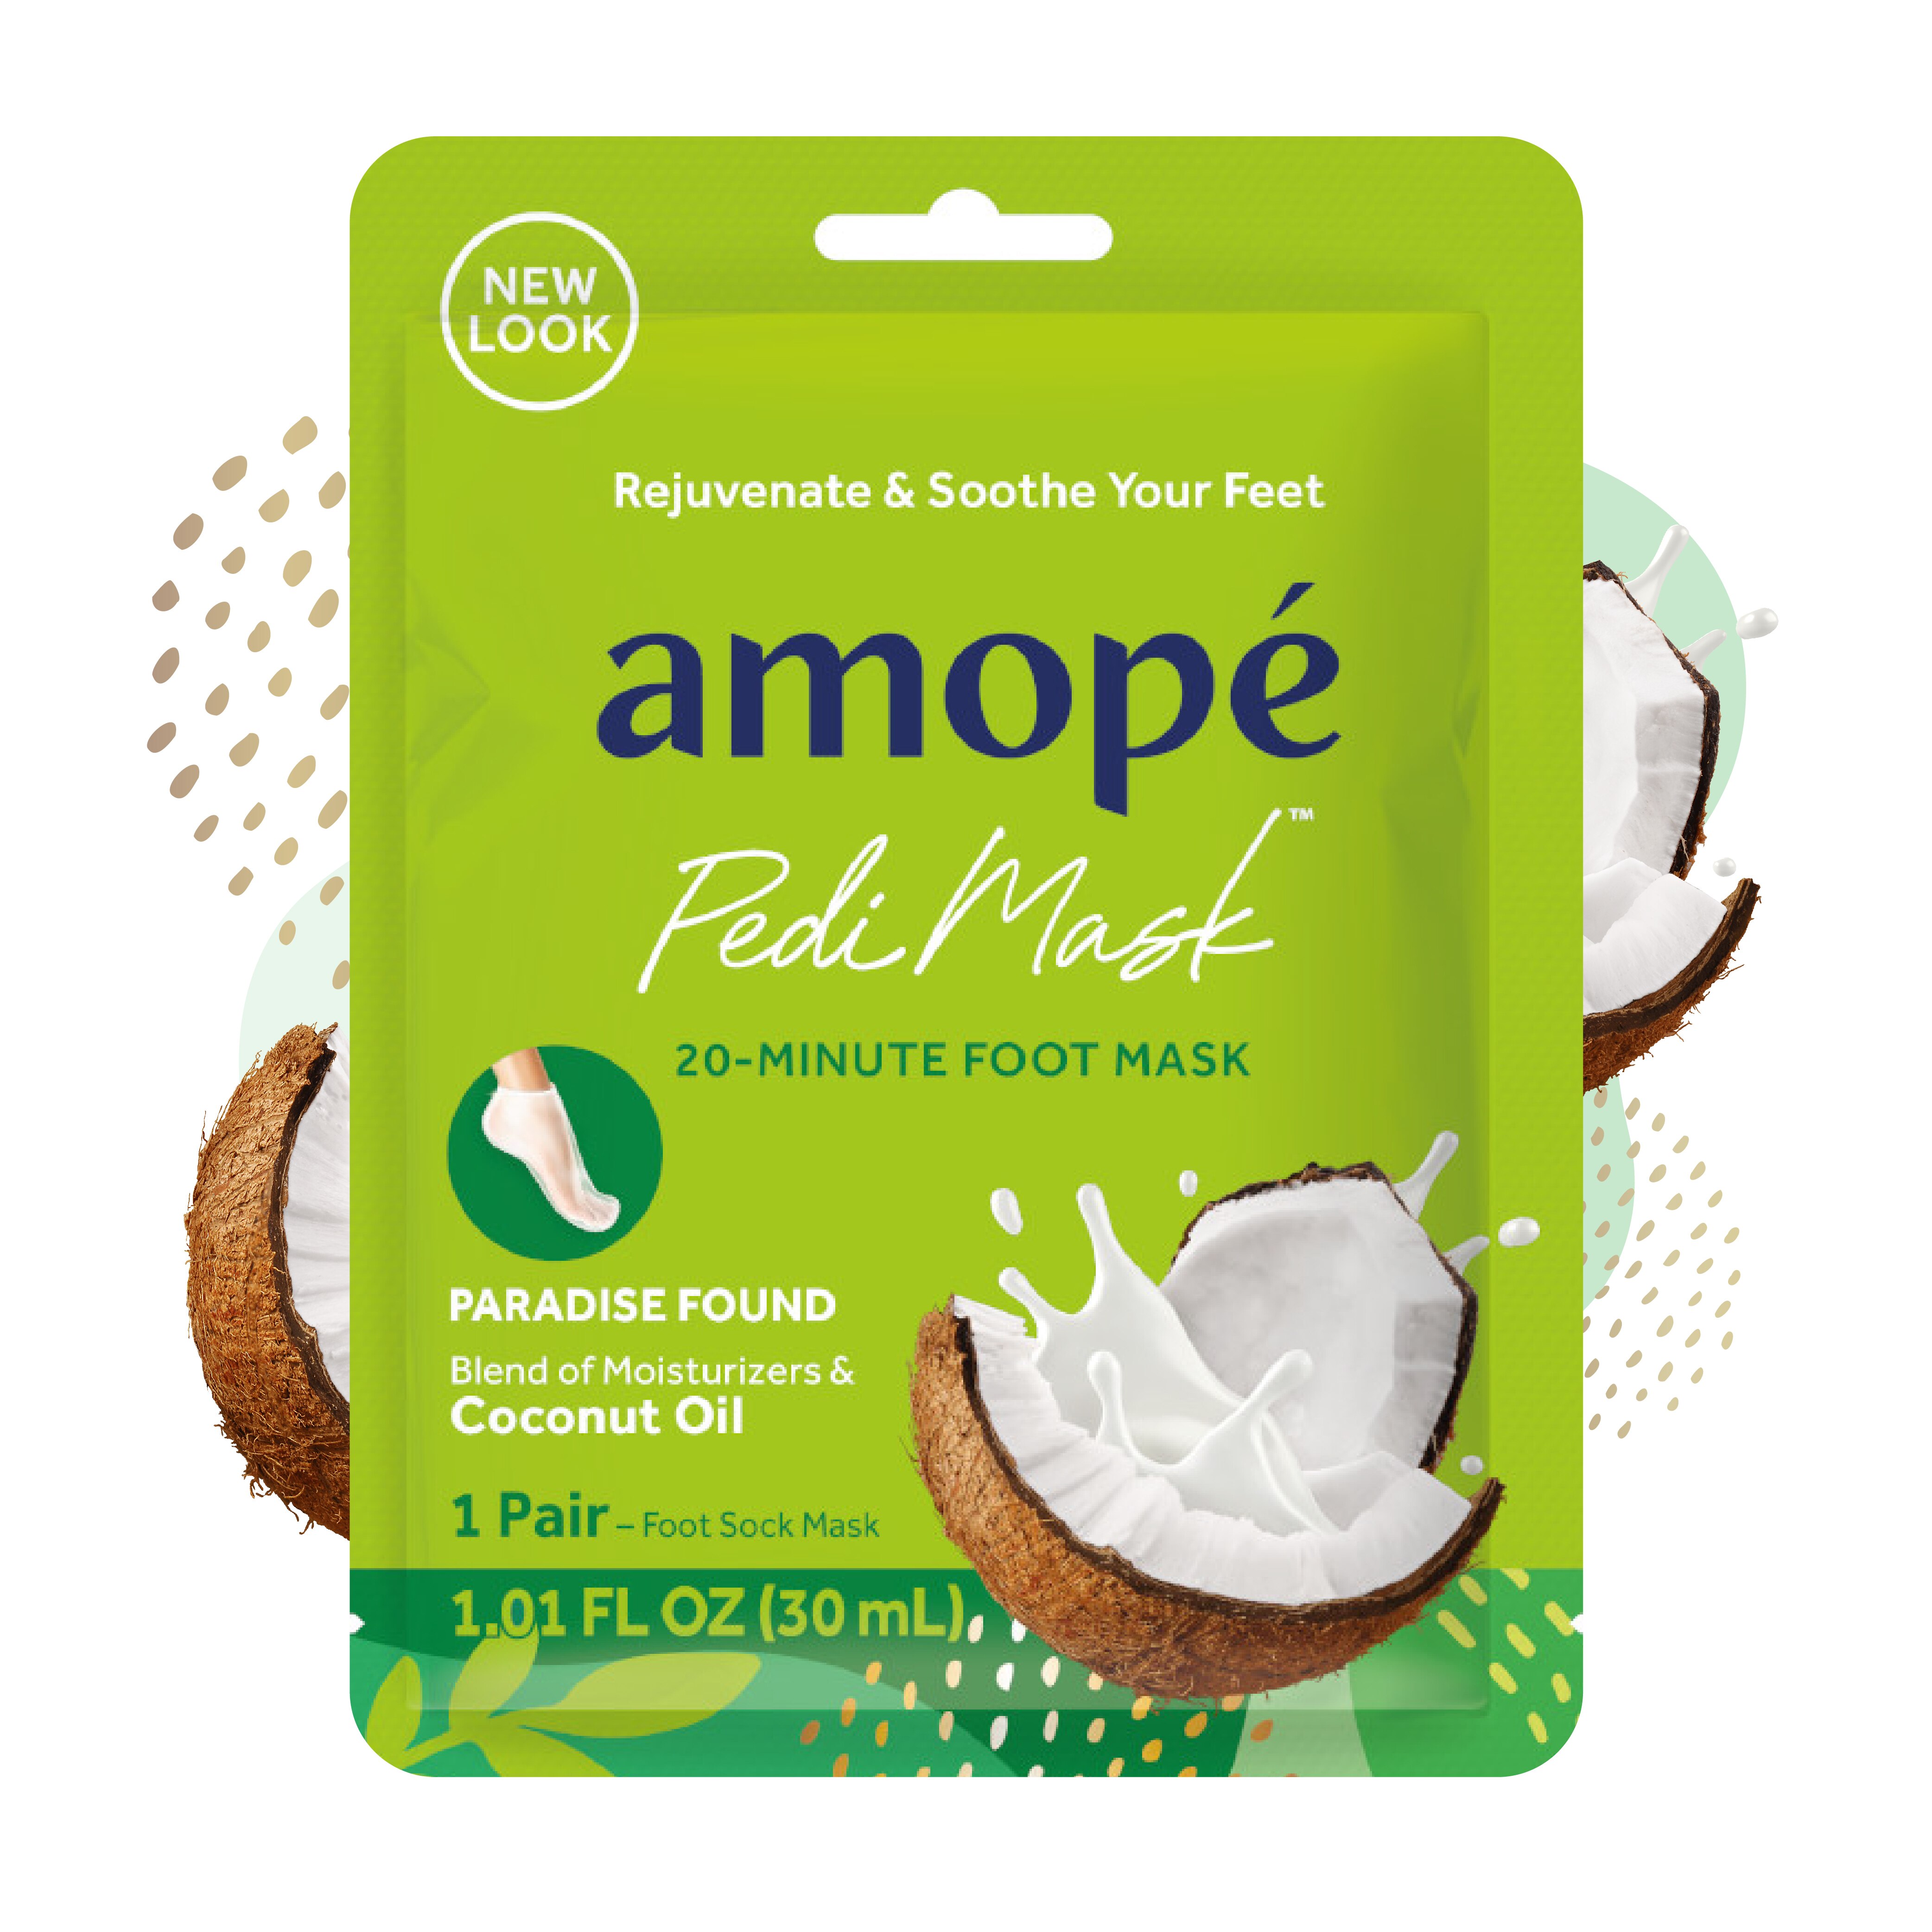 Amope PediMask 20-Minute Foot Mask - Paradise Found With Coconut Oil - 2 Ct , CVS